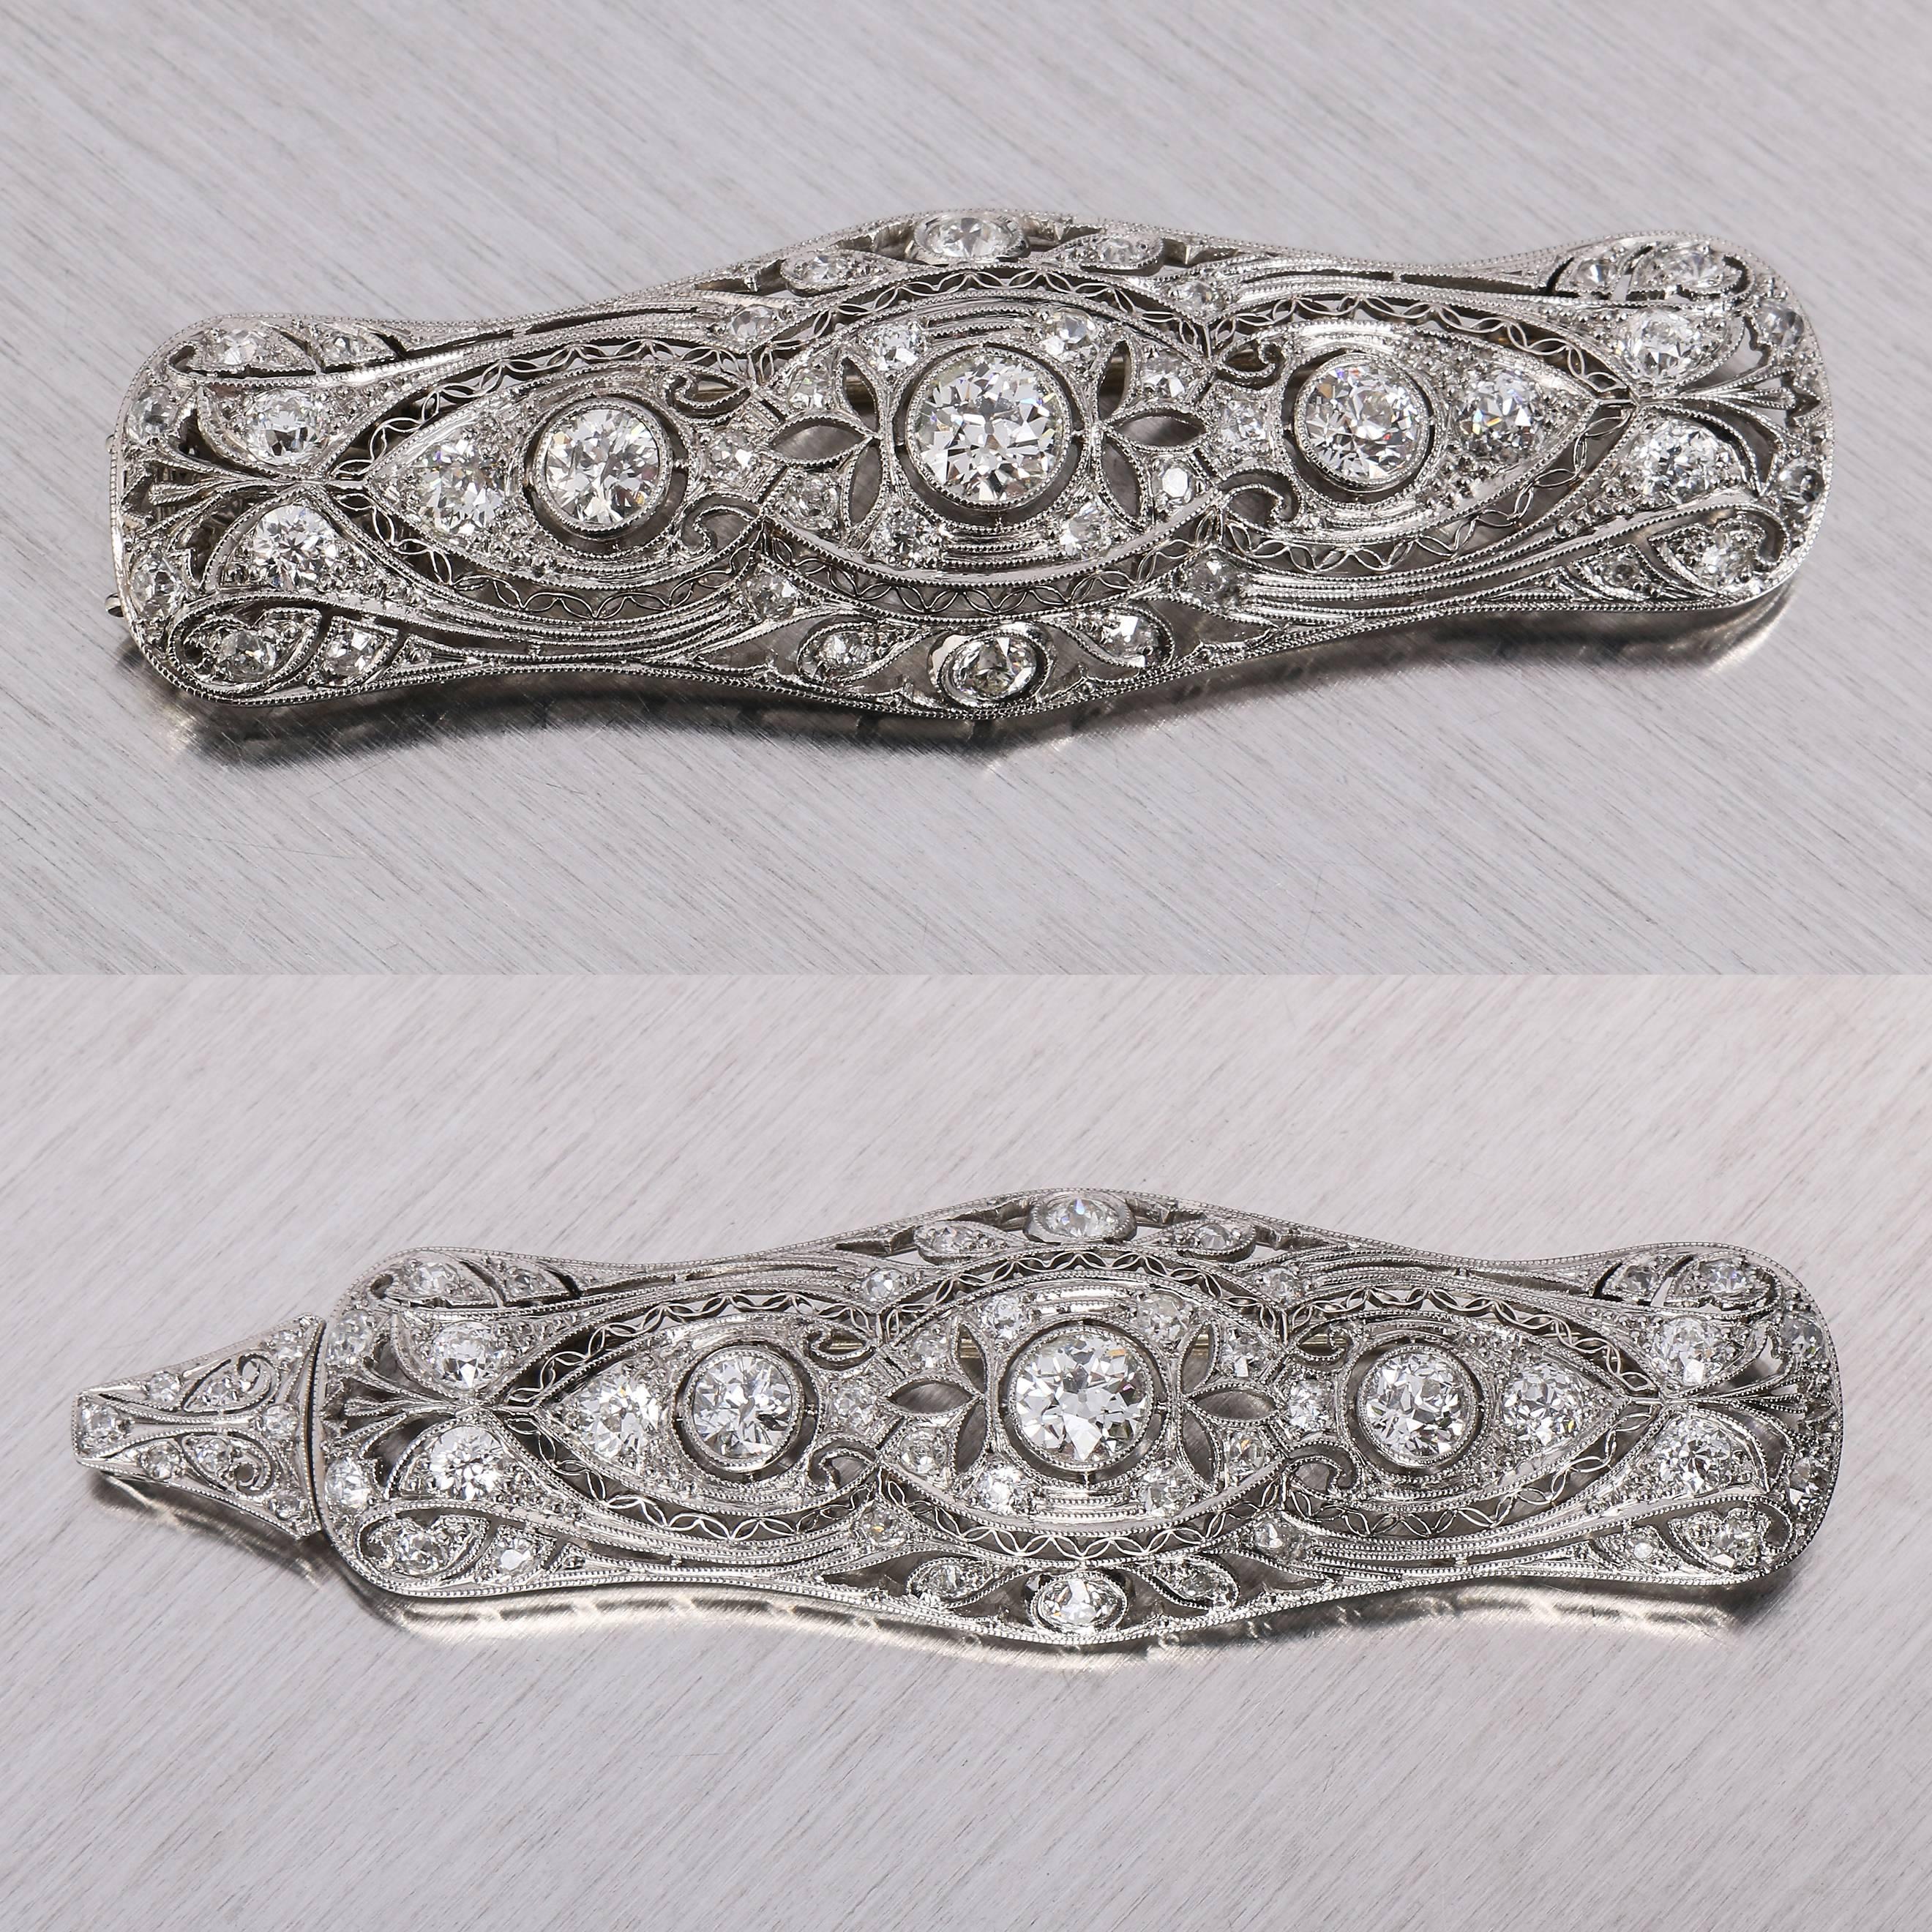 Antique Gregorian c.1915 platinum diamond bar pin pendant. Features three Old European cut diamonds at center of pin. Diamond in center is estimated to be approximately .50 ct, graded as G/SI2. Two diamonds on either side of center diamond are